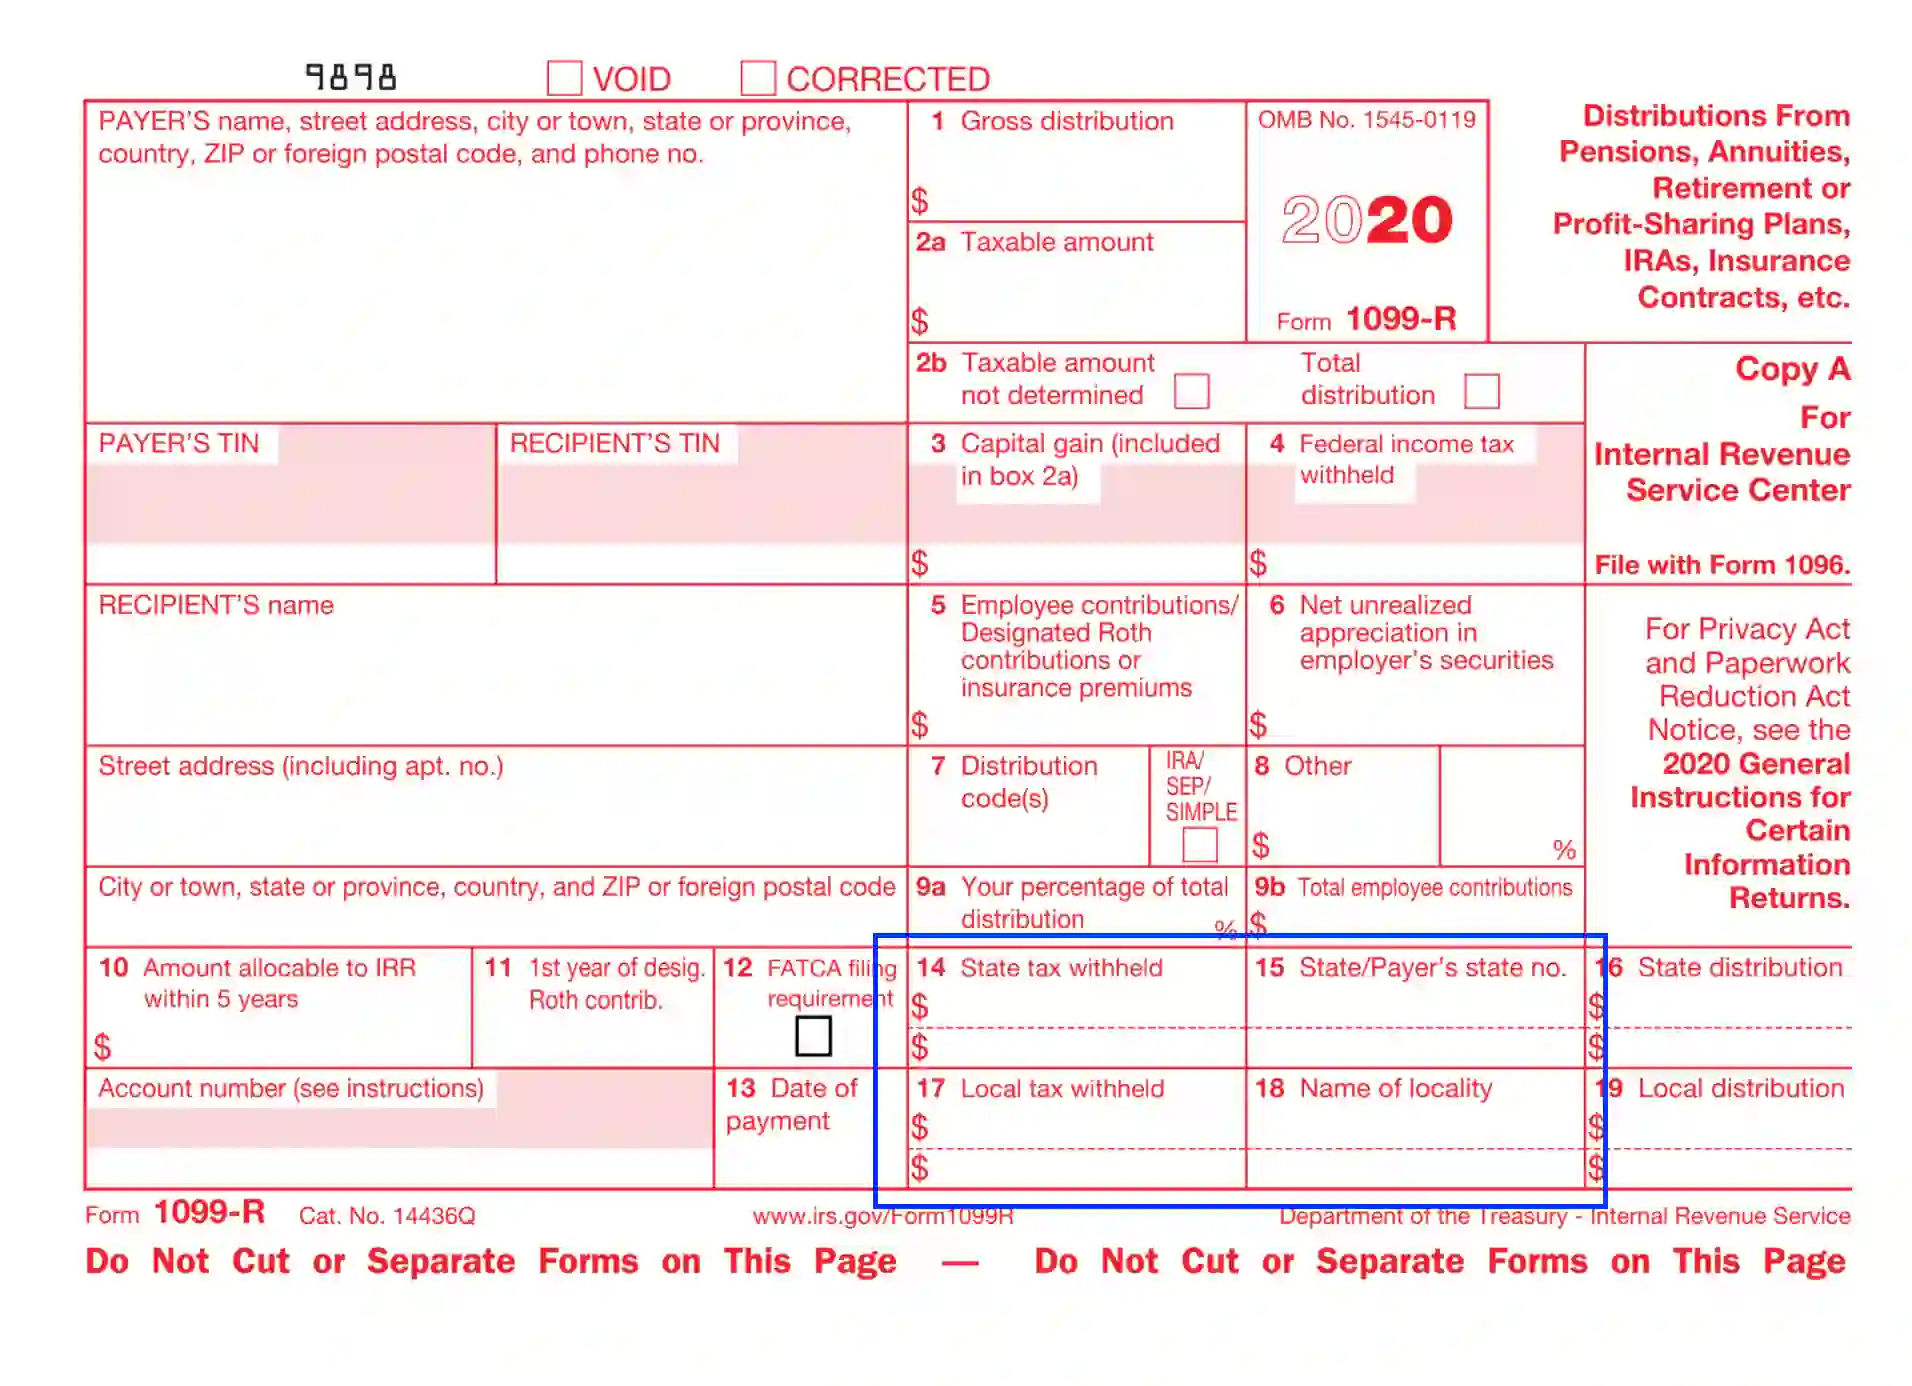 https://formspal.com/wp-content/uploads/2021/03/step-4.14-enter-the-amounts-for-units-1-through-19-filling-out-an-irs-form-1099-r.webp